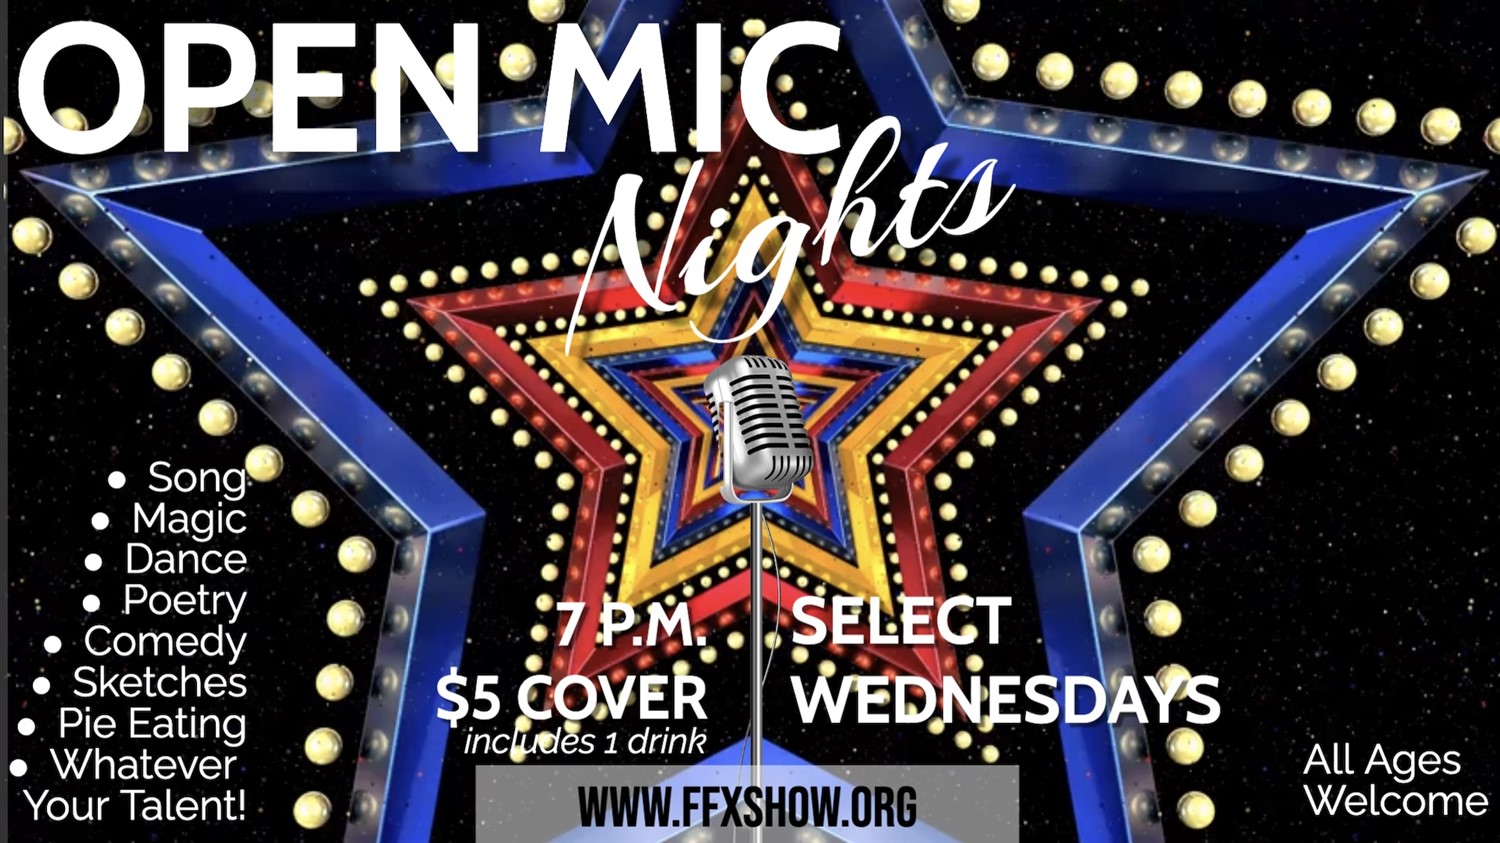 OPEN MIC NIGHT Come out to enjoy, or share your own talent on the FFX Stage! on nov. 30, 19:00@FFX Theatre - Compra entradas y obtén información enFamily Fun Xperience tickets.ffxshow.org